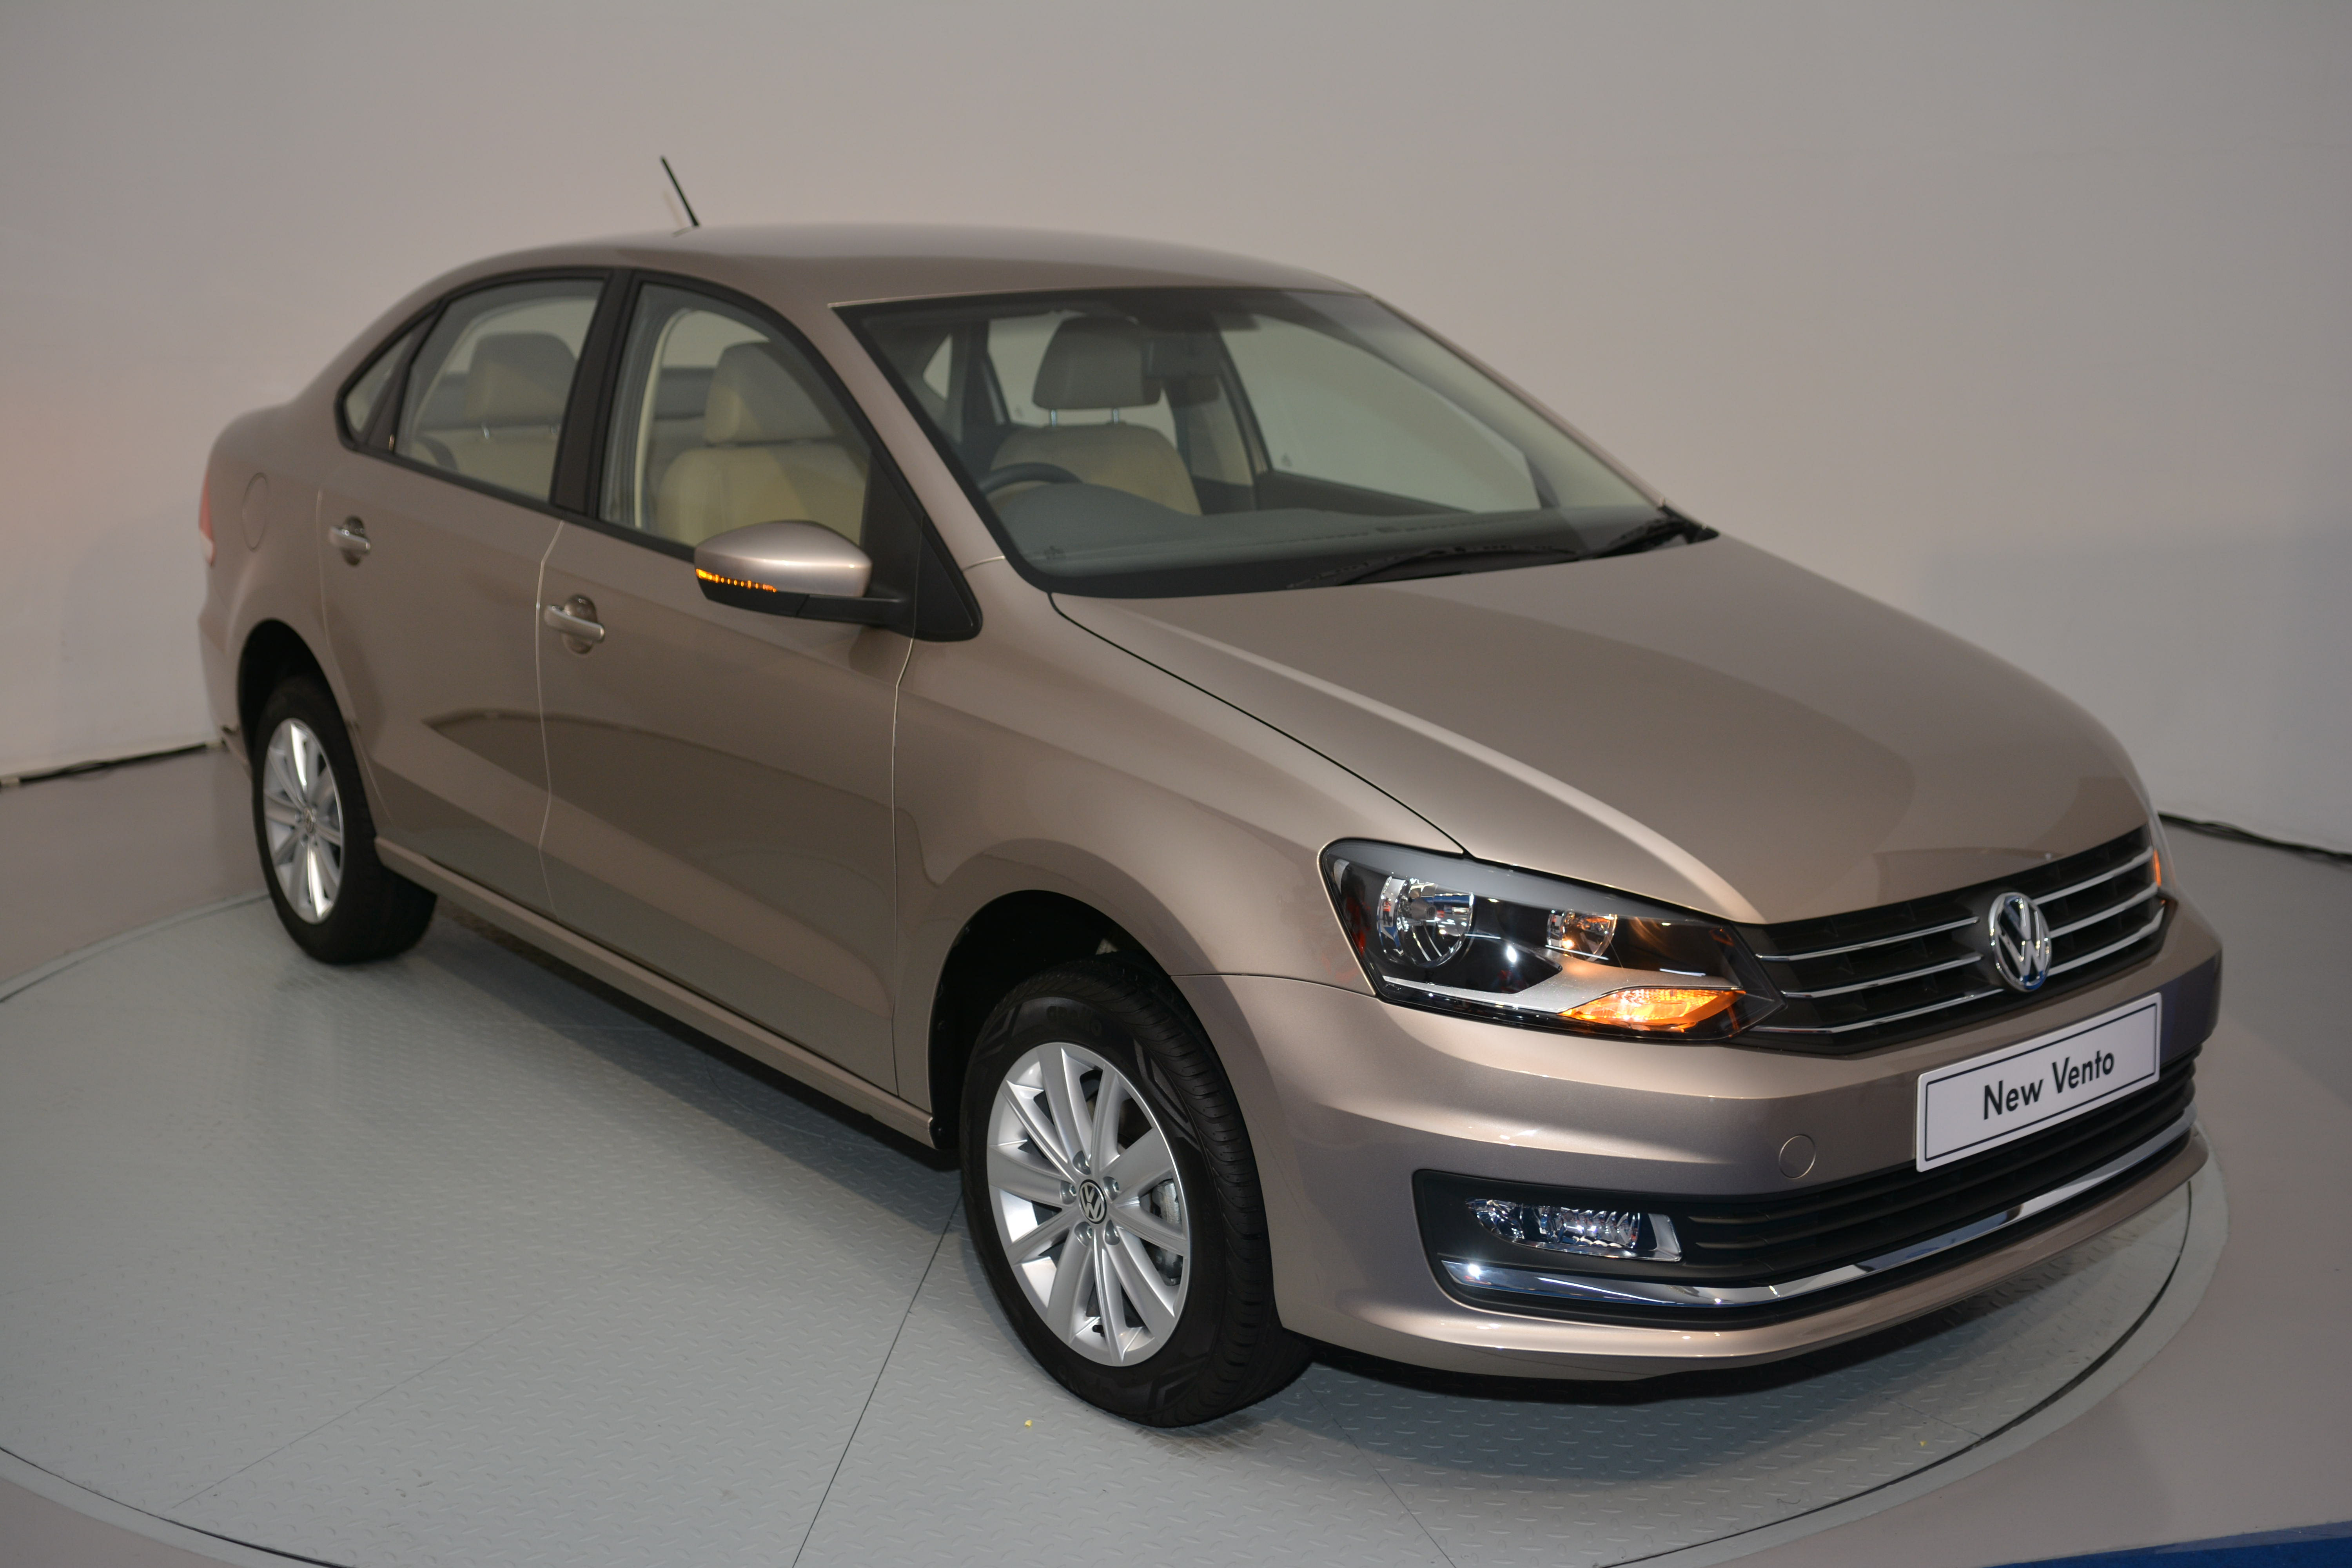 Volkswagen to launch the facelifted Vento on June 23